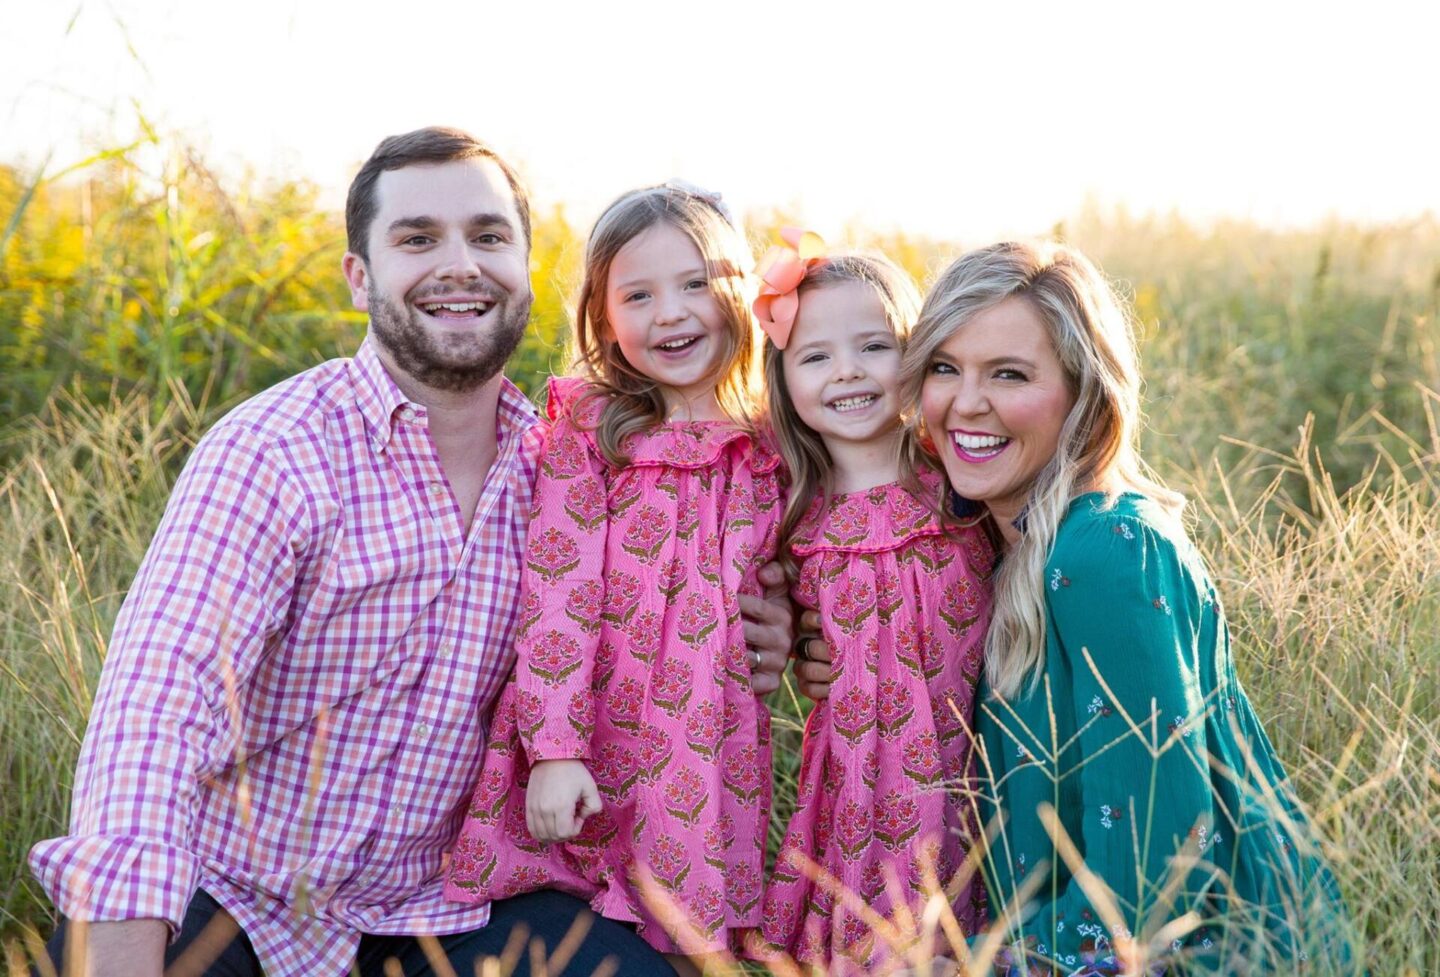 10 Year Wedding Anniversary by popular Nashville lifestyle blog, Hello Happiness: image of a mom and dad and their two young daughters standing together in a field. 